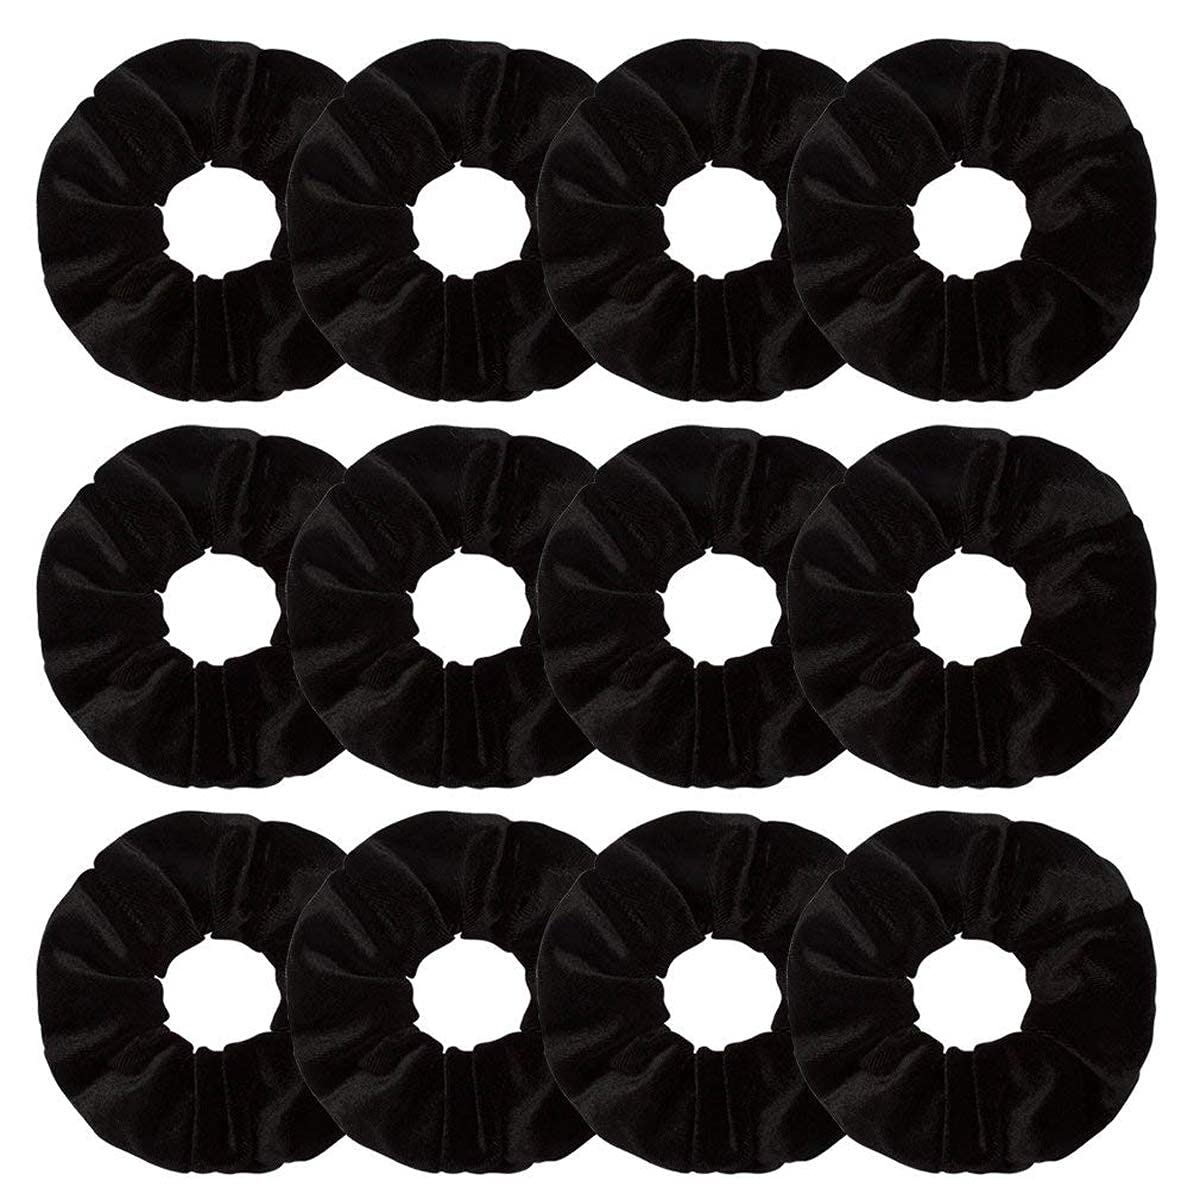 LACE IT | Black Velvet Hair scrunchies Rubber Band Pack Of 1 (12 Pieces)